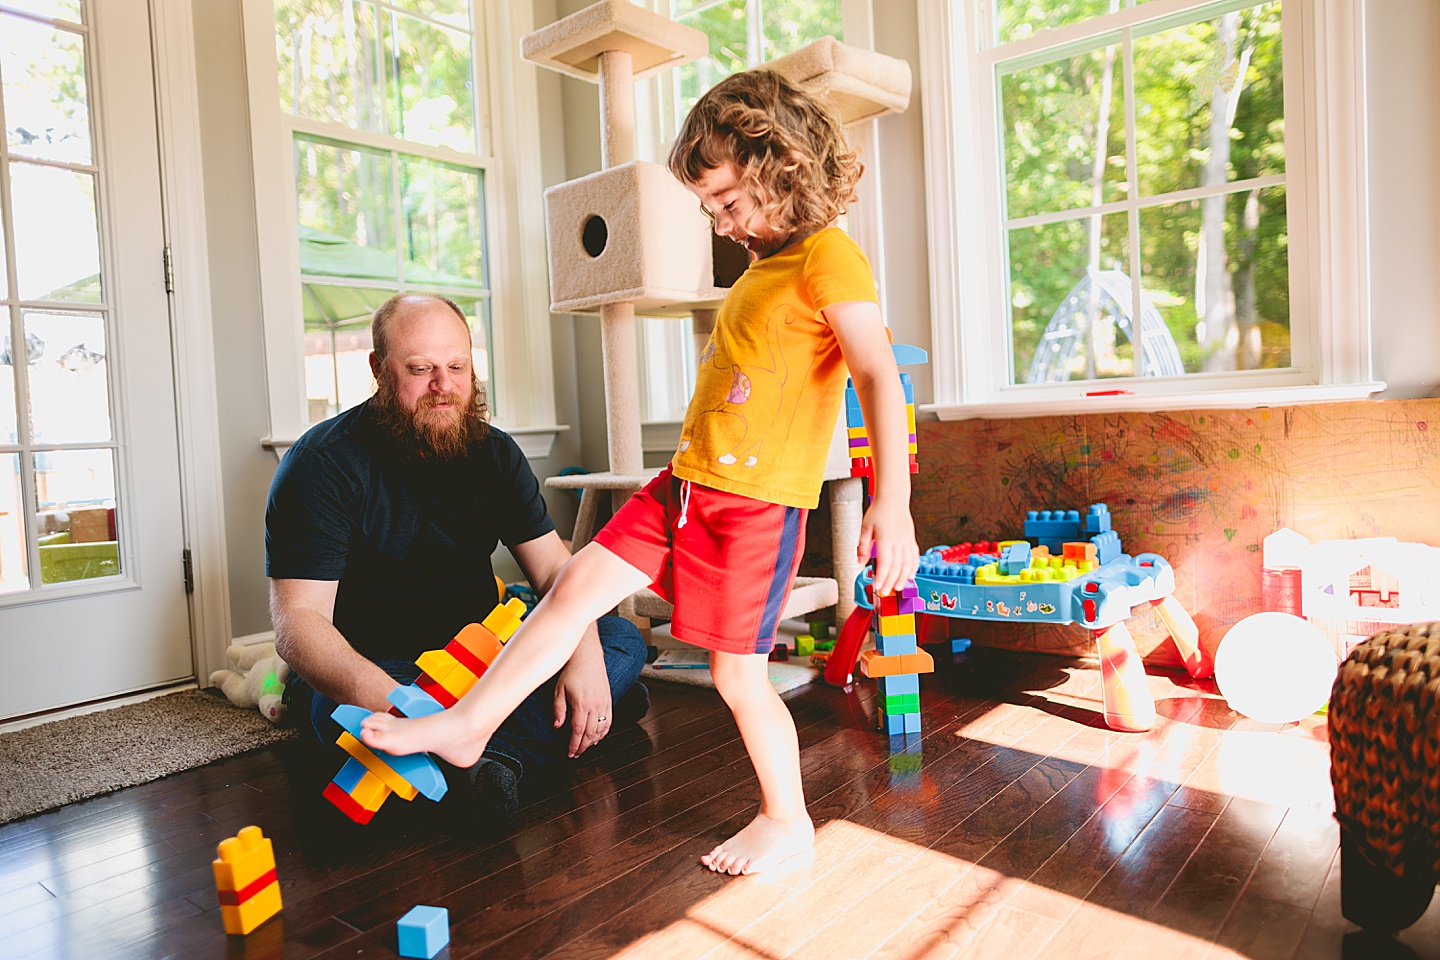 Family playing with blocks in sunroom